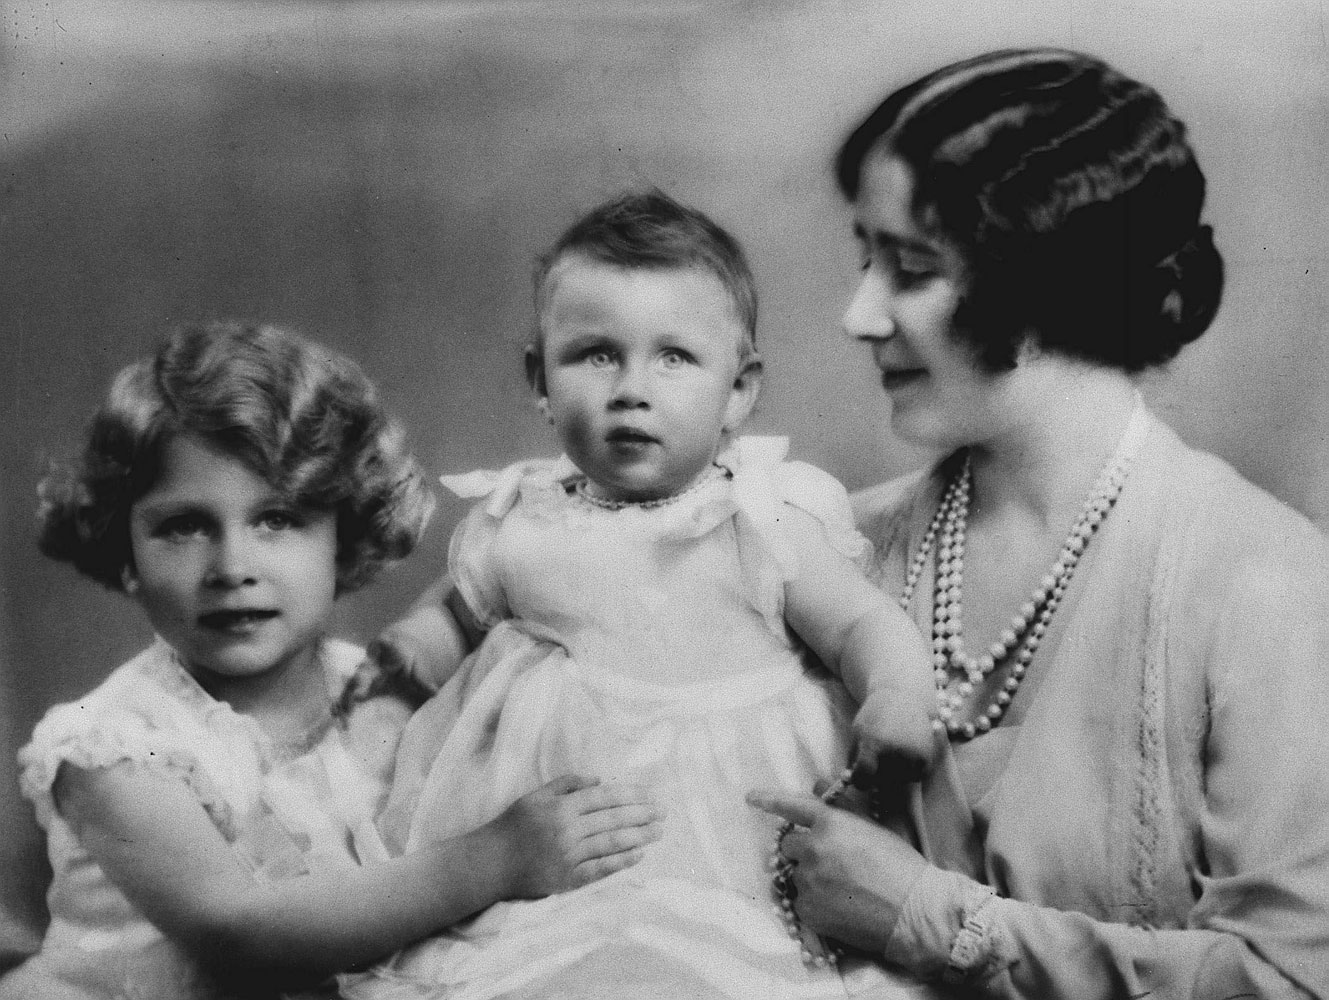 The naughty sister: the baby Princess Margaret, flanked by Princess Elizabeth and their mother, led a colorful life. Prevented from marrying her first love, a divorced commoner, she later married, and divorced, fashionable photographer Antony Armstrong-Jones.